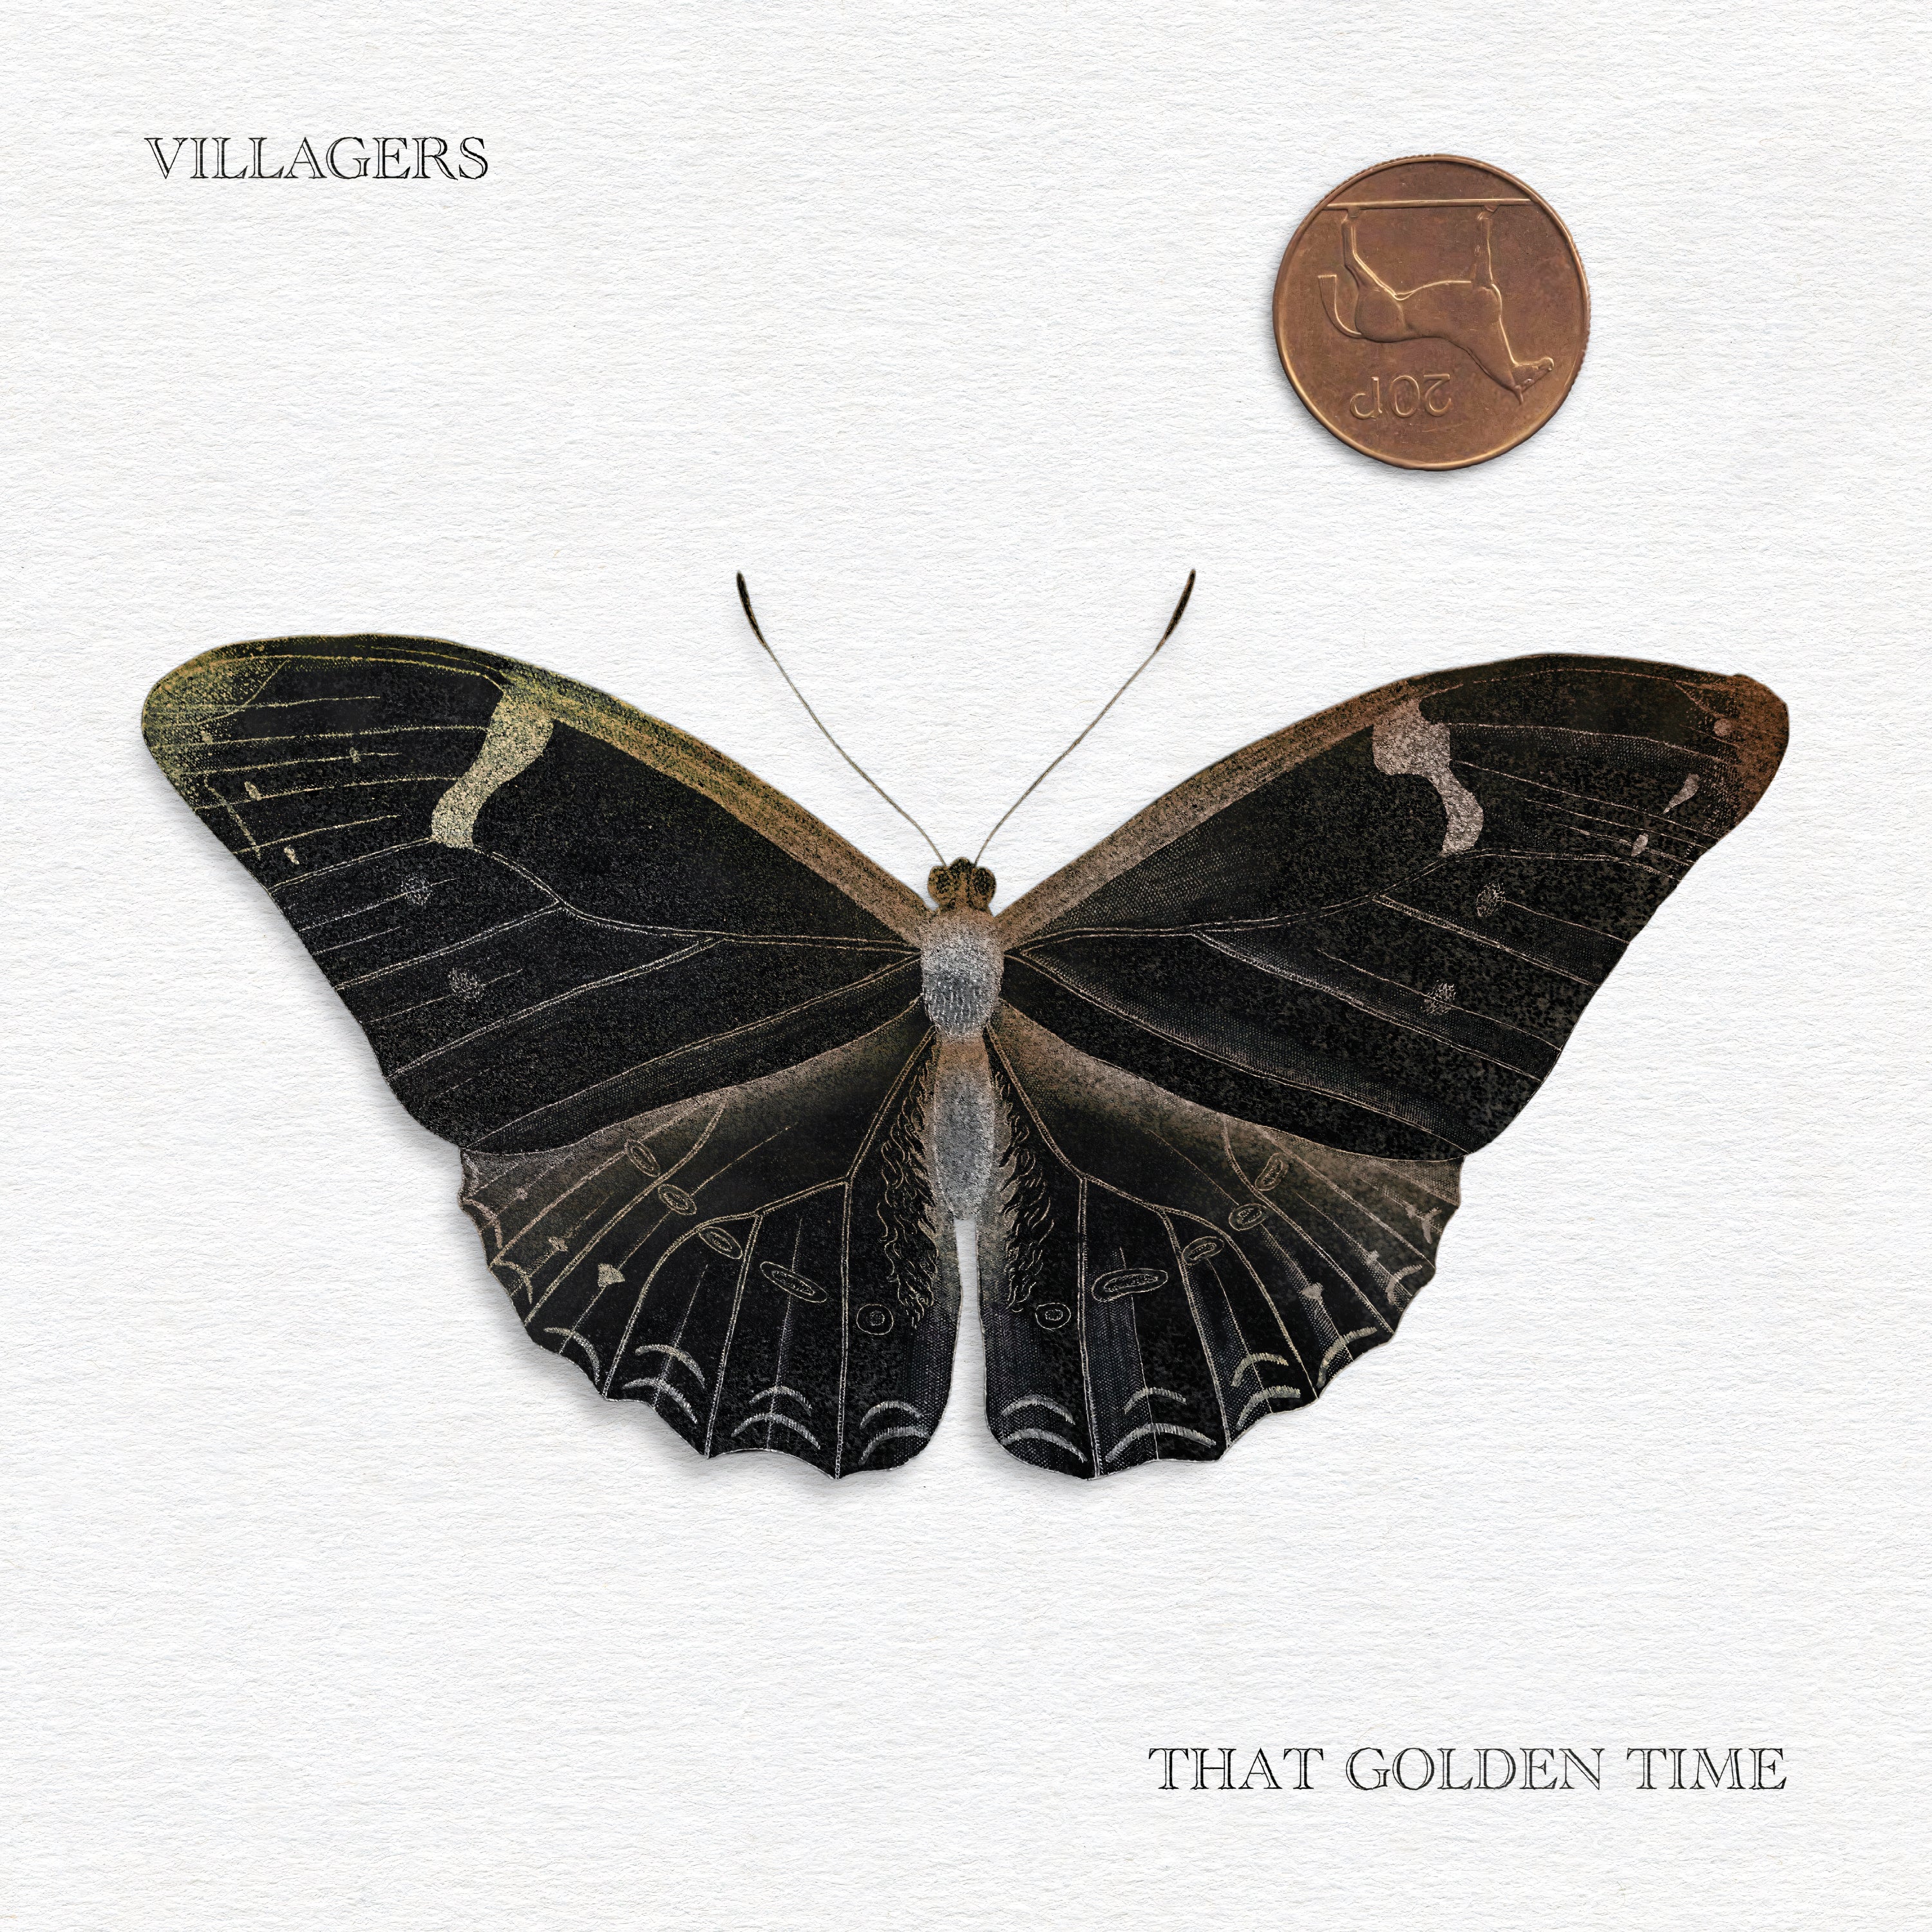 Villagers - That Golden Time CD